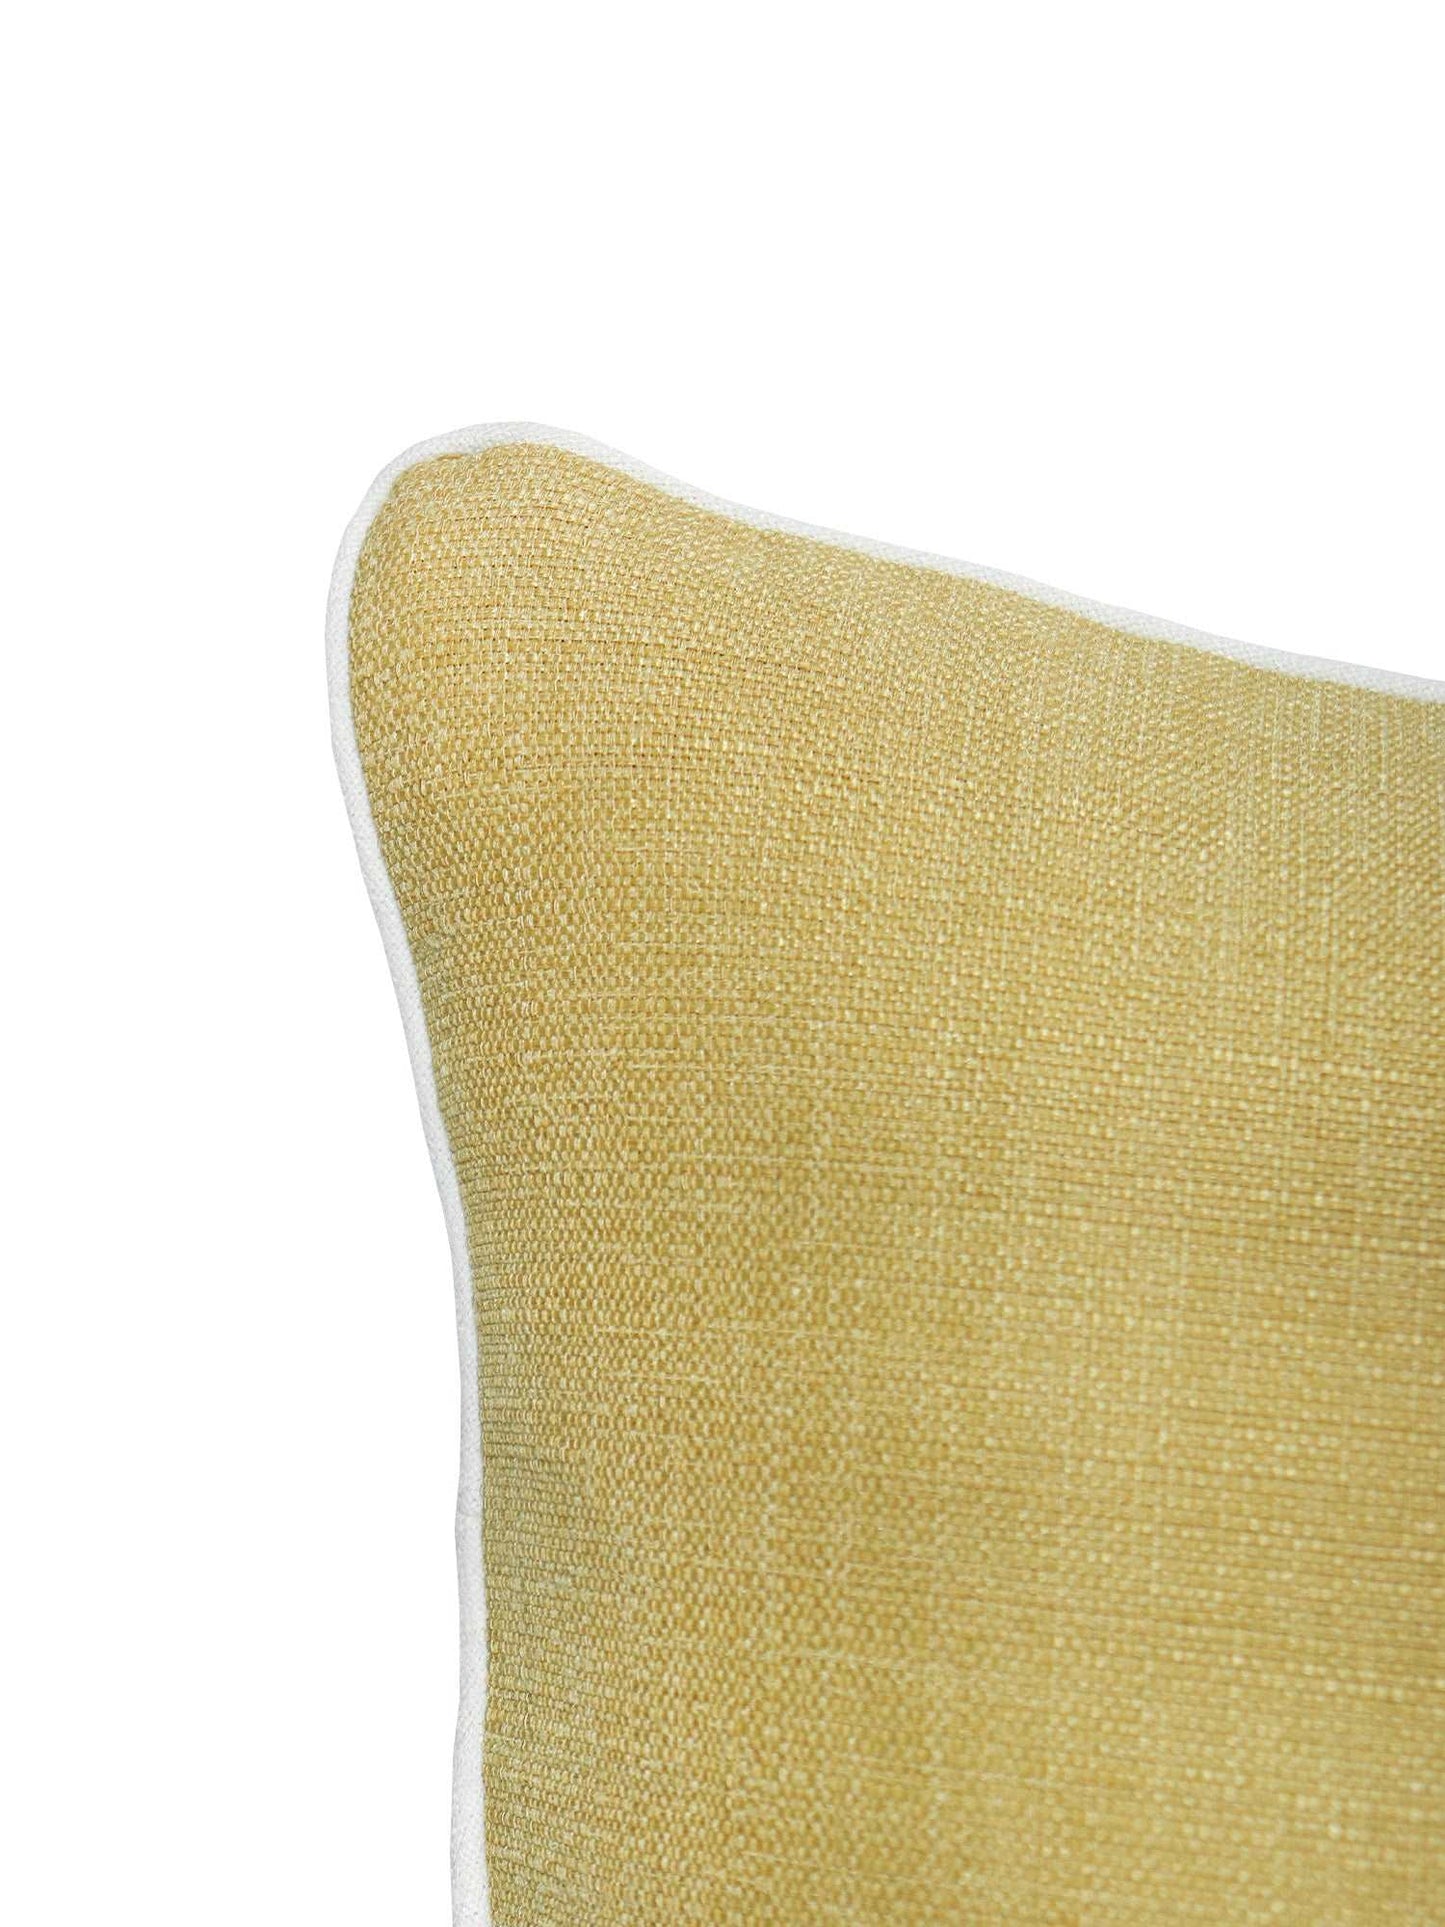 Cushion Cover for Sofa, Bed Cotton Blend with Cord Piping | Yellow - 16x16in(40x40cm) (Pack of 1)